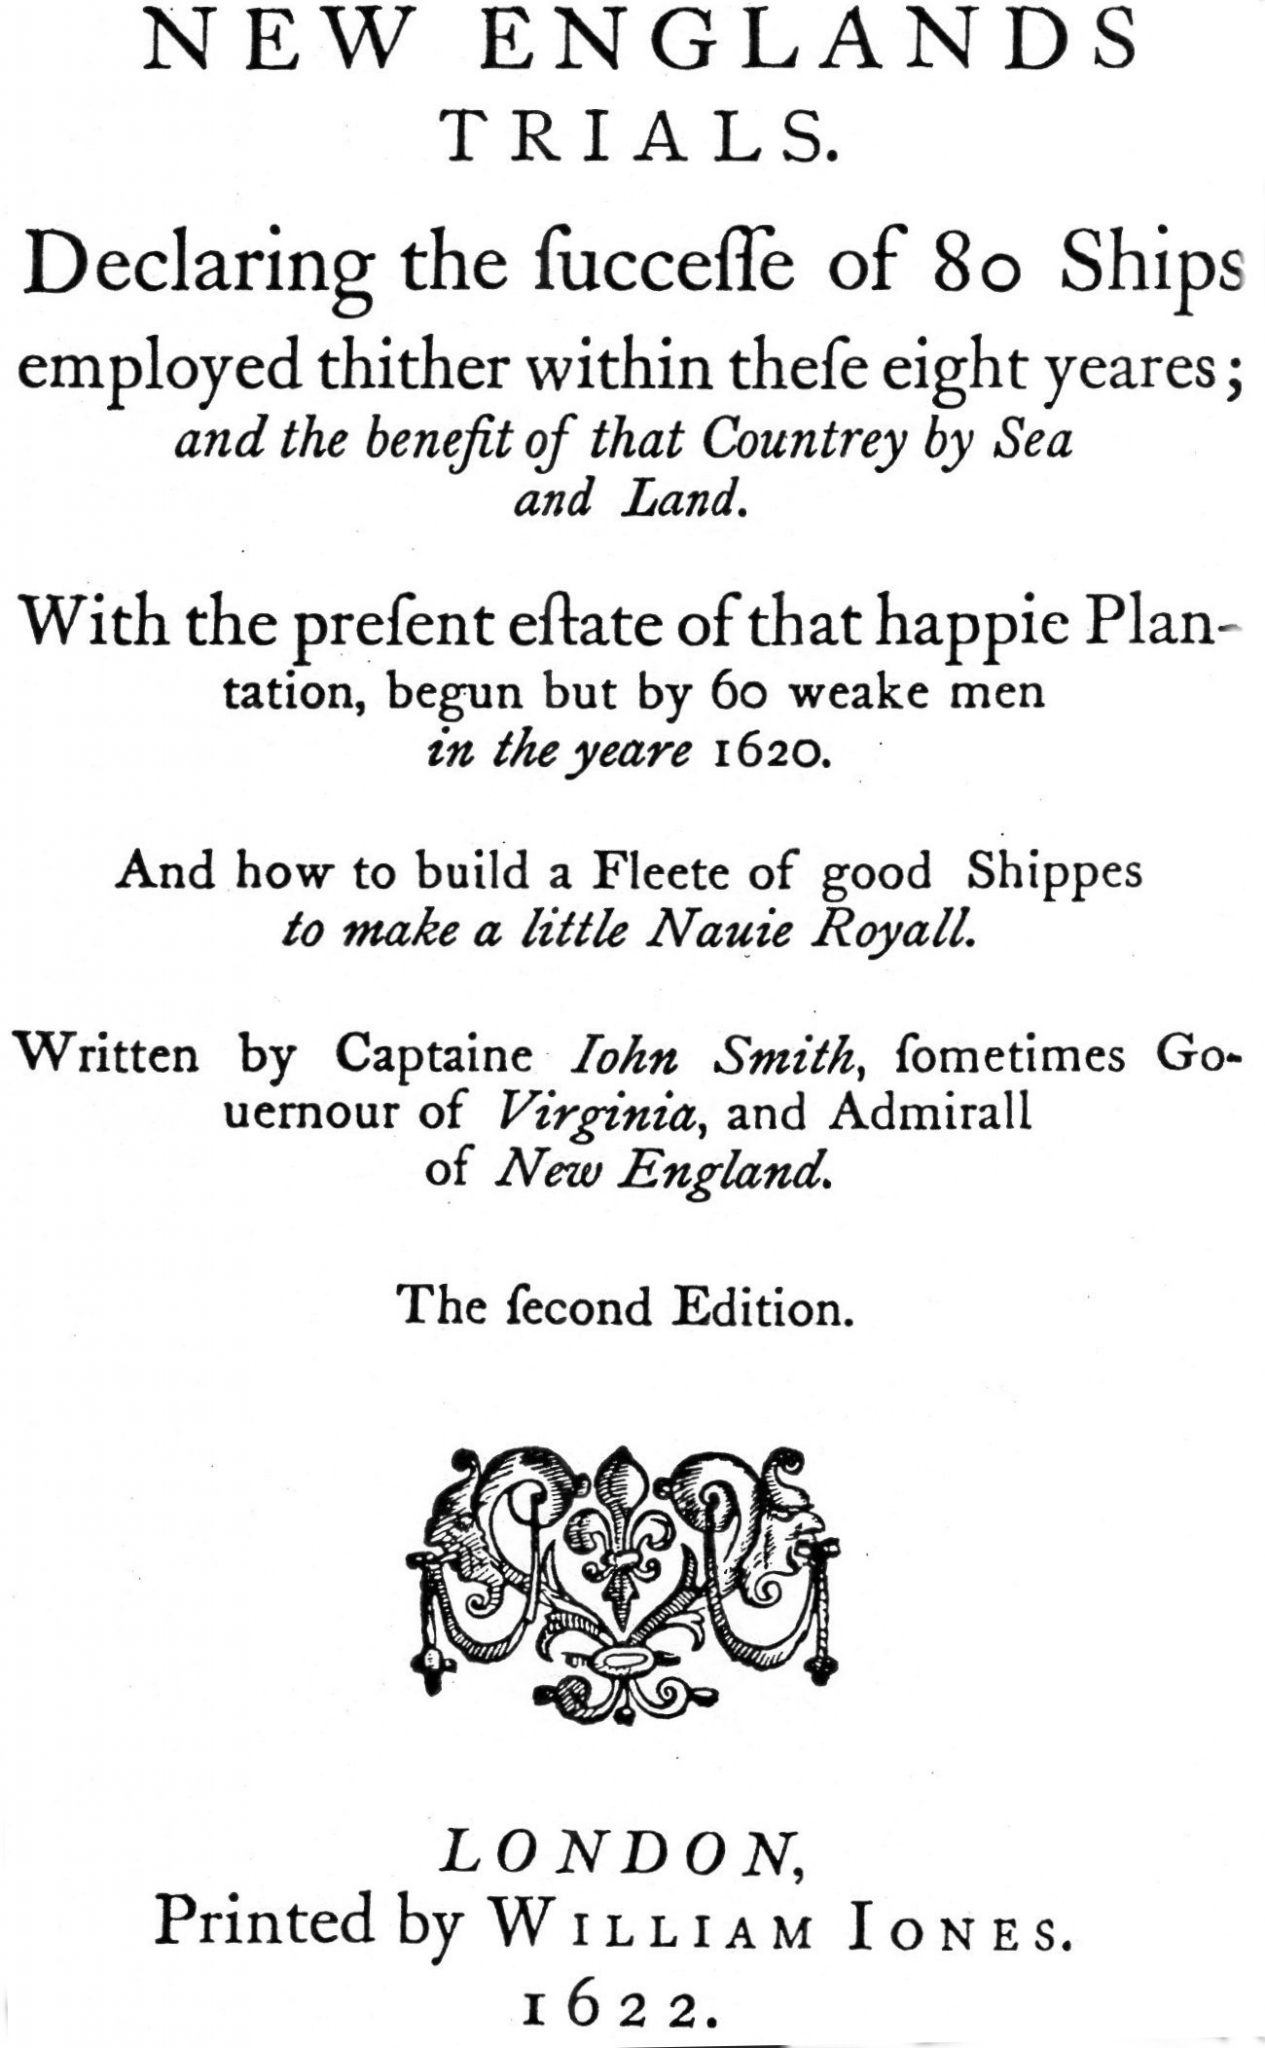 New England's Trials Declaring the Success of 80 Ships employed thither within these eight yeares